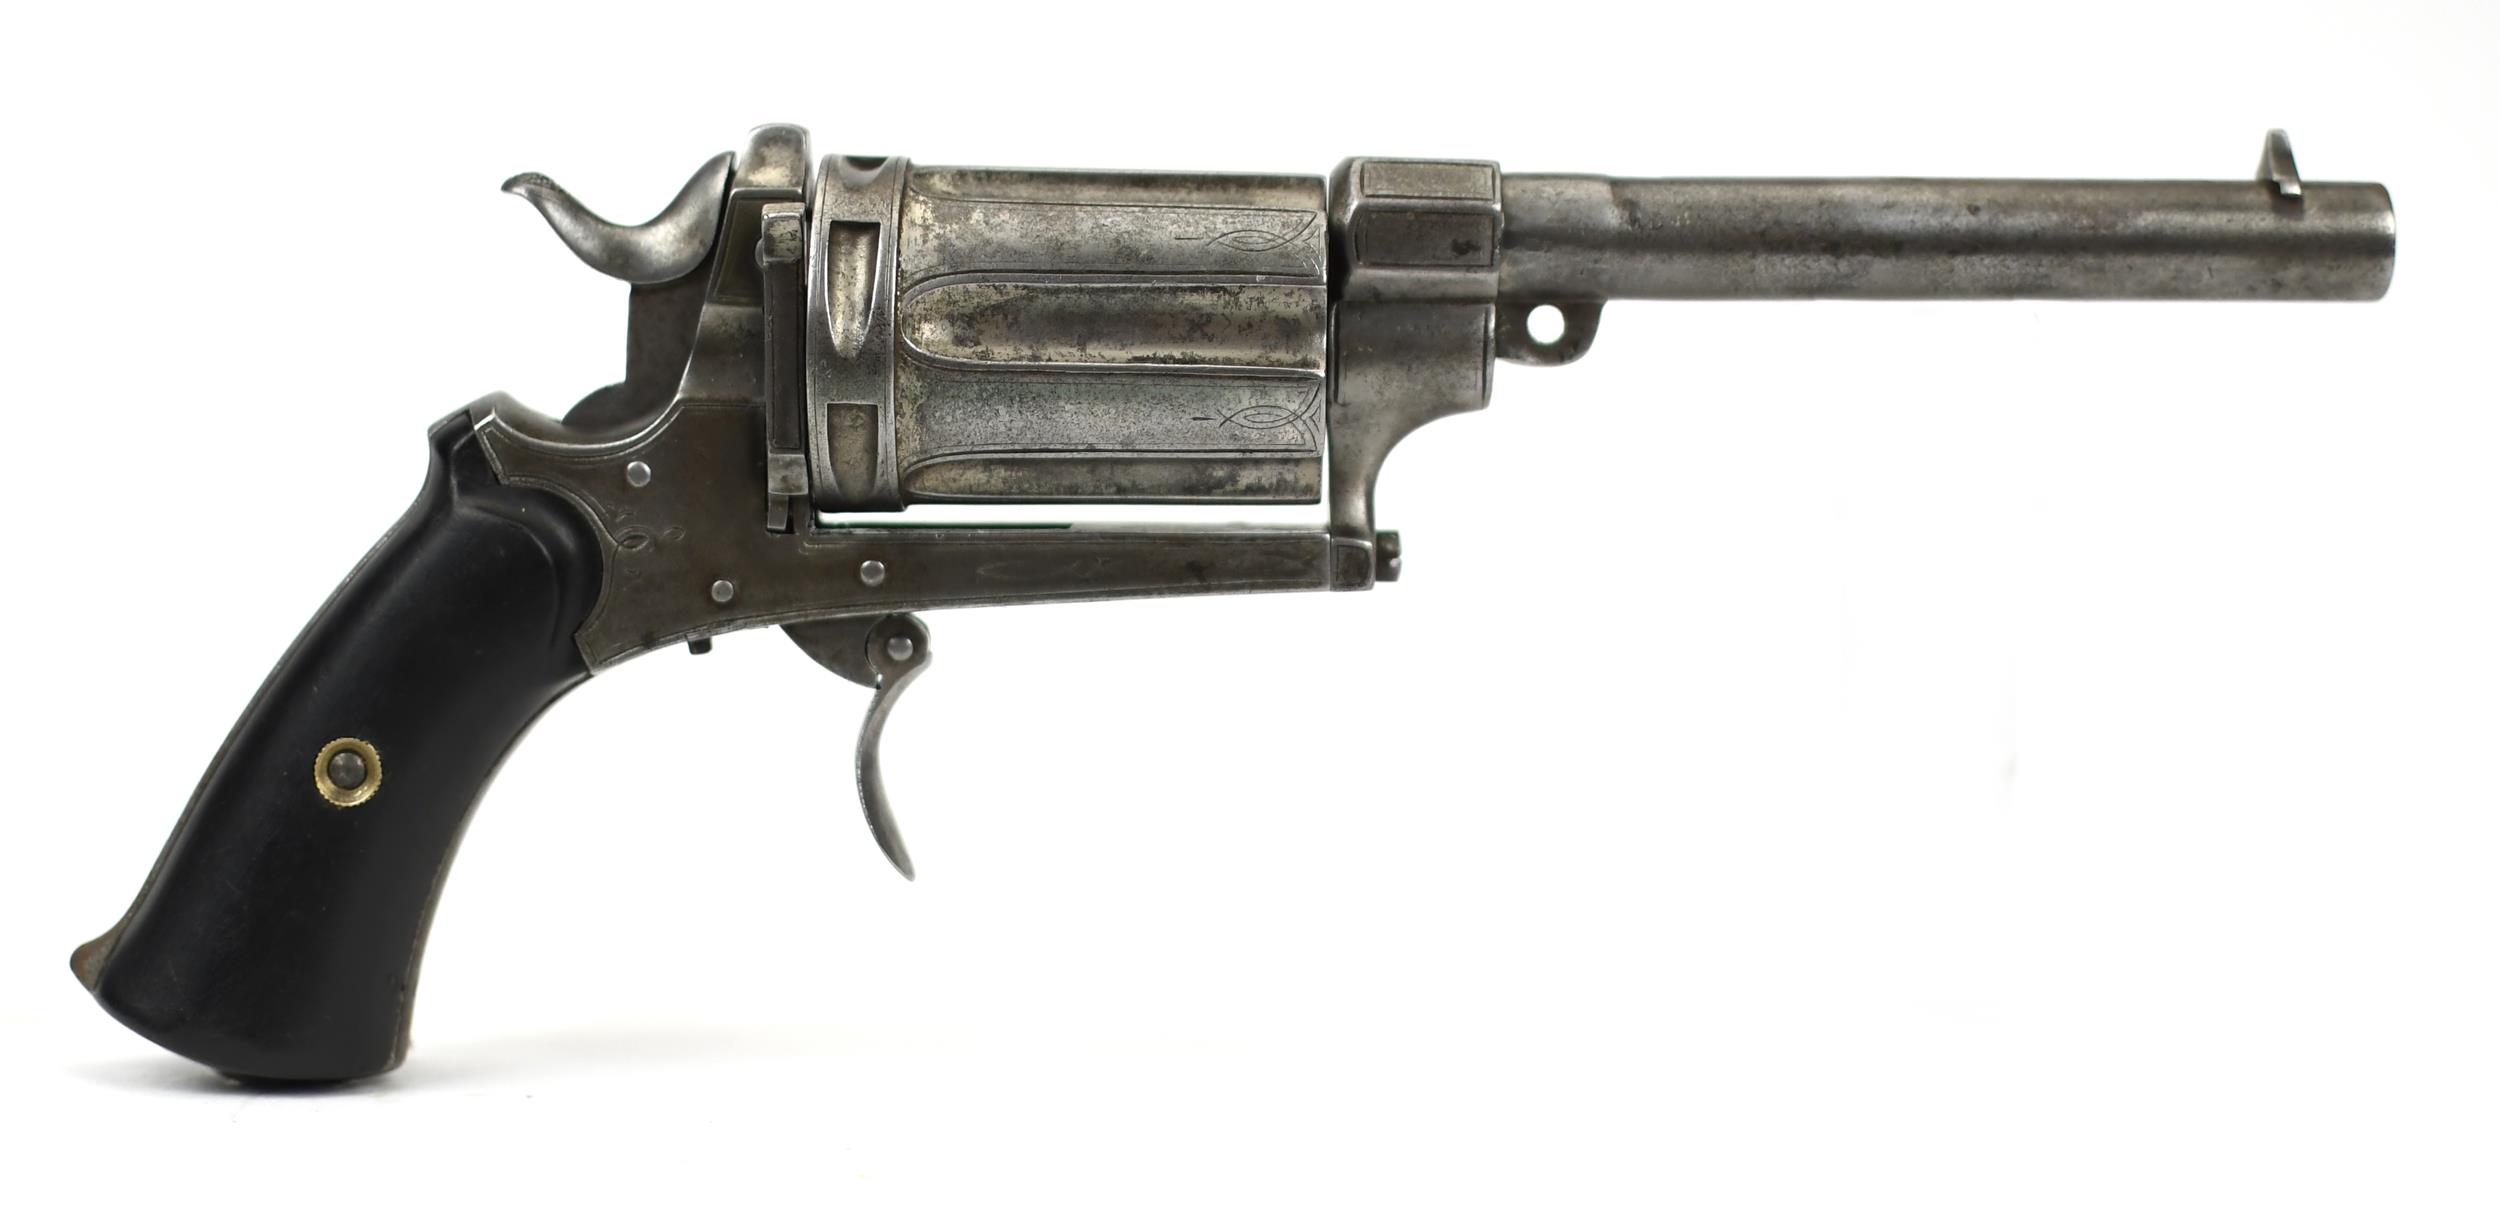 19TH C. ENGRAVED REVOLVER. A 19th